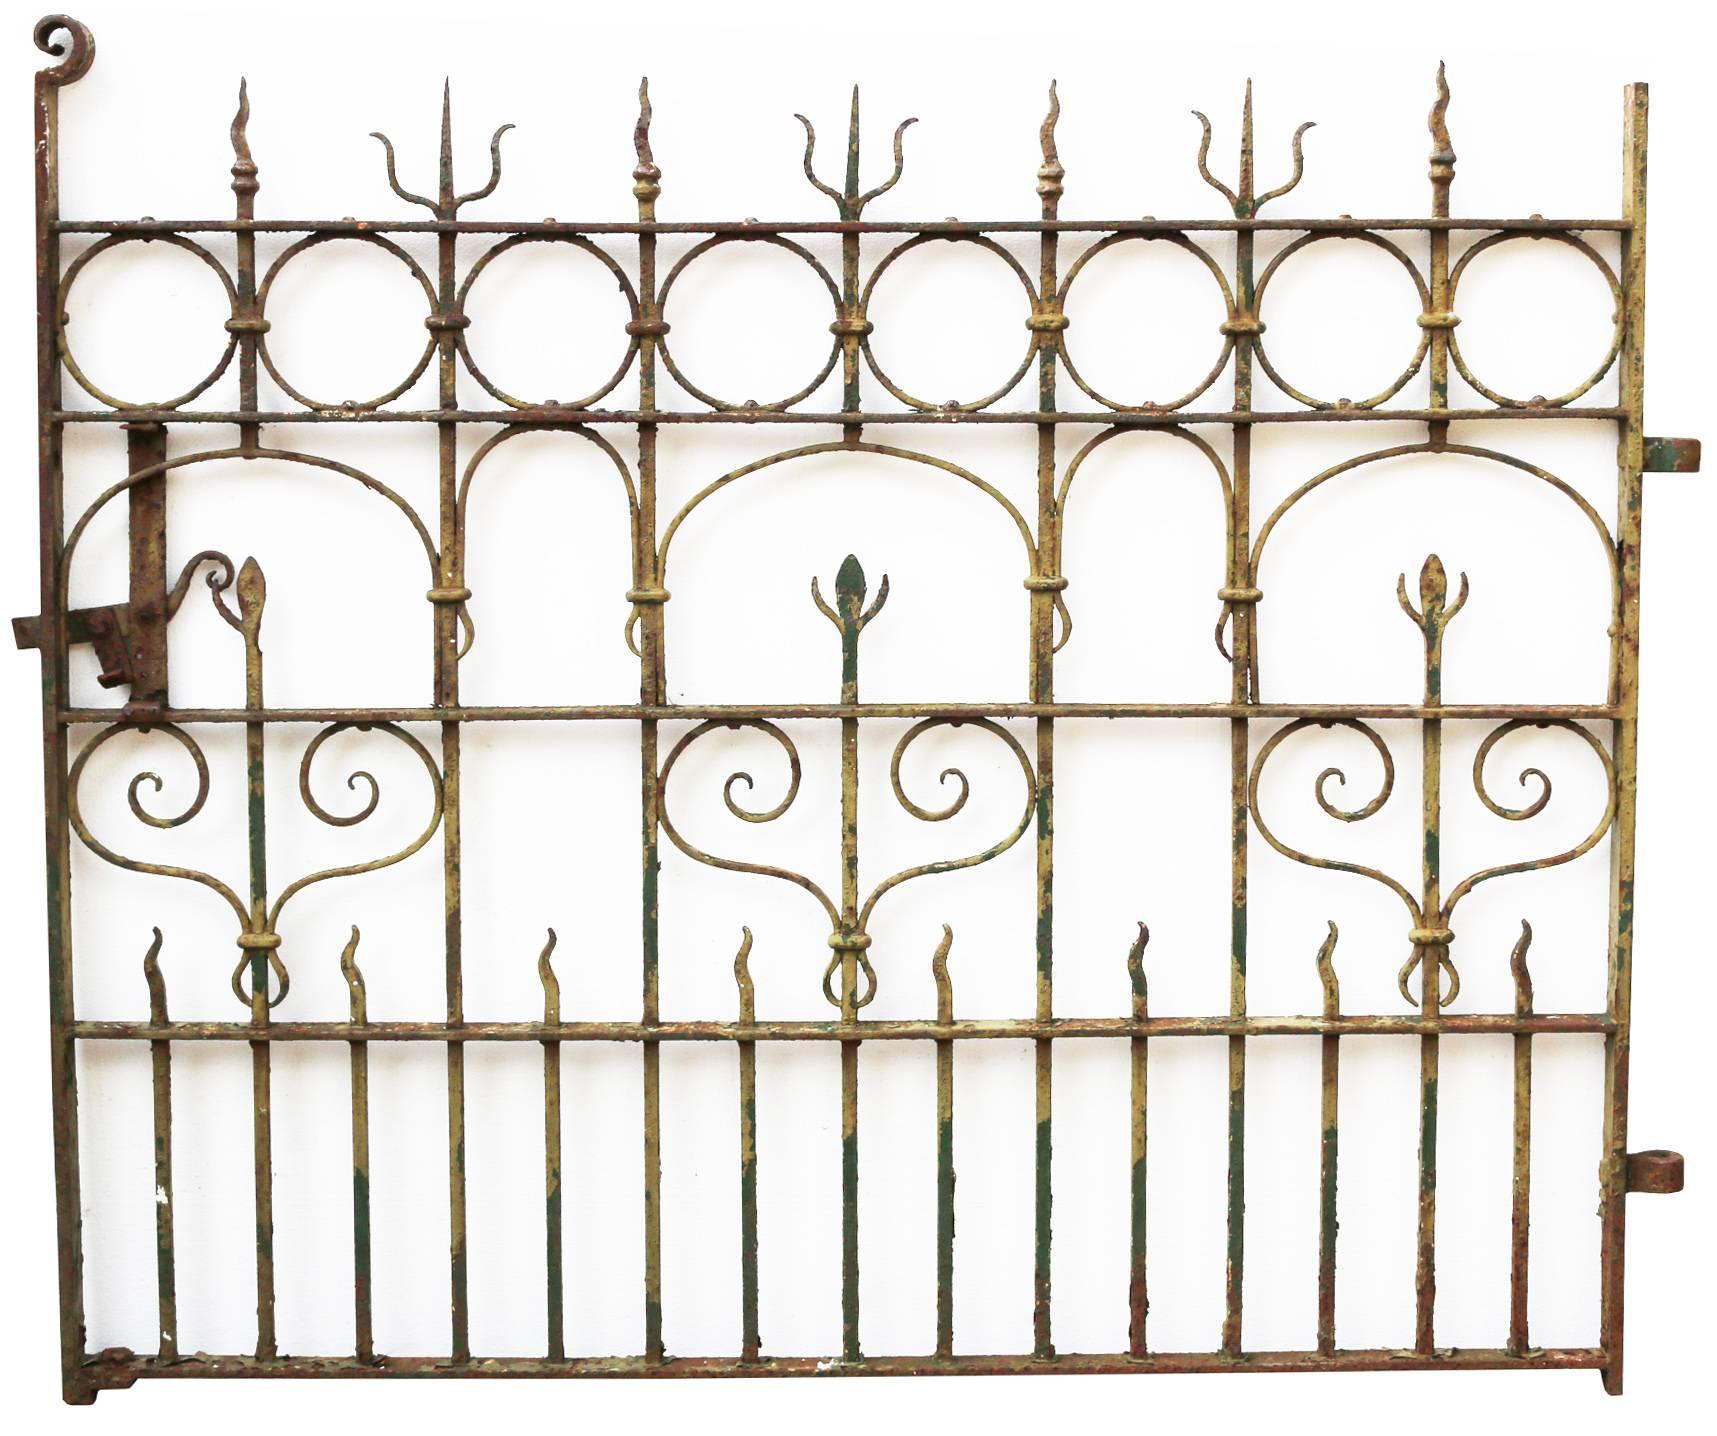 This gate has hinges, a working latch and is finished in old paint.
The width includes hinges.